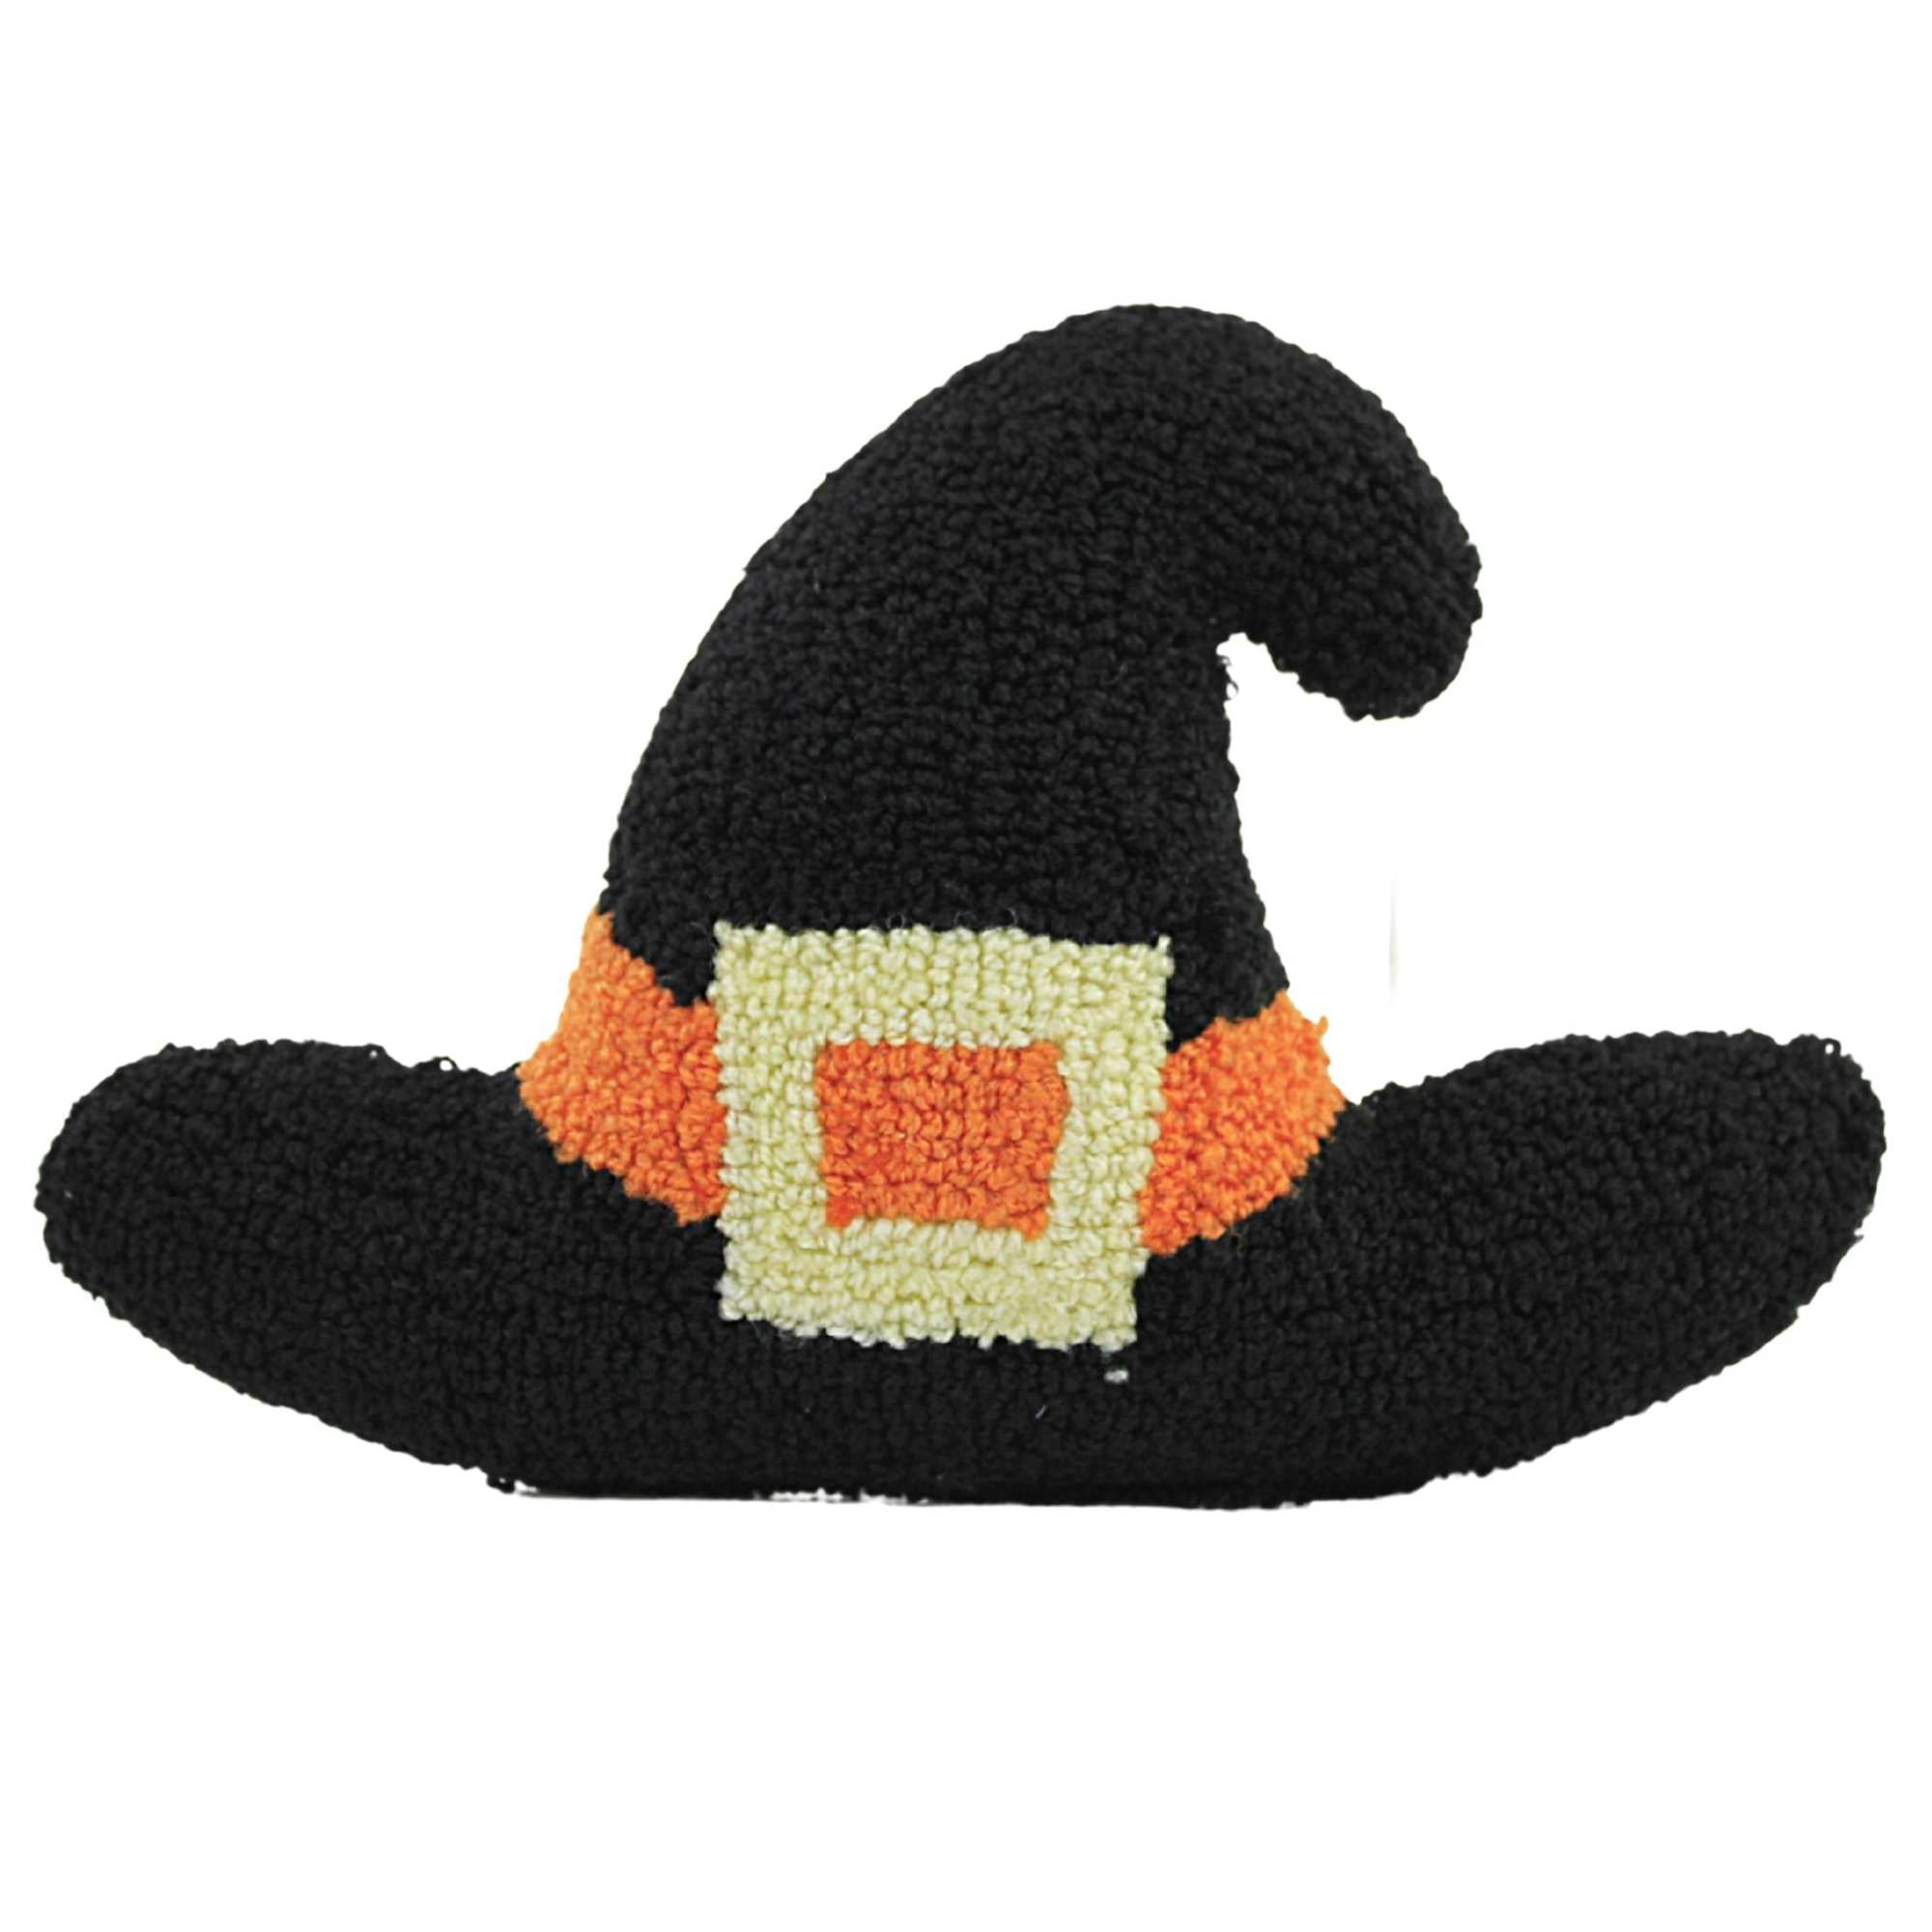 Home Decor Witch Hat Shaped Pillow Cotton Halloween Buckle C44463001 |  SBKGifts.com